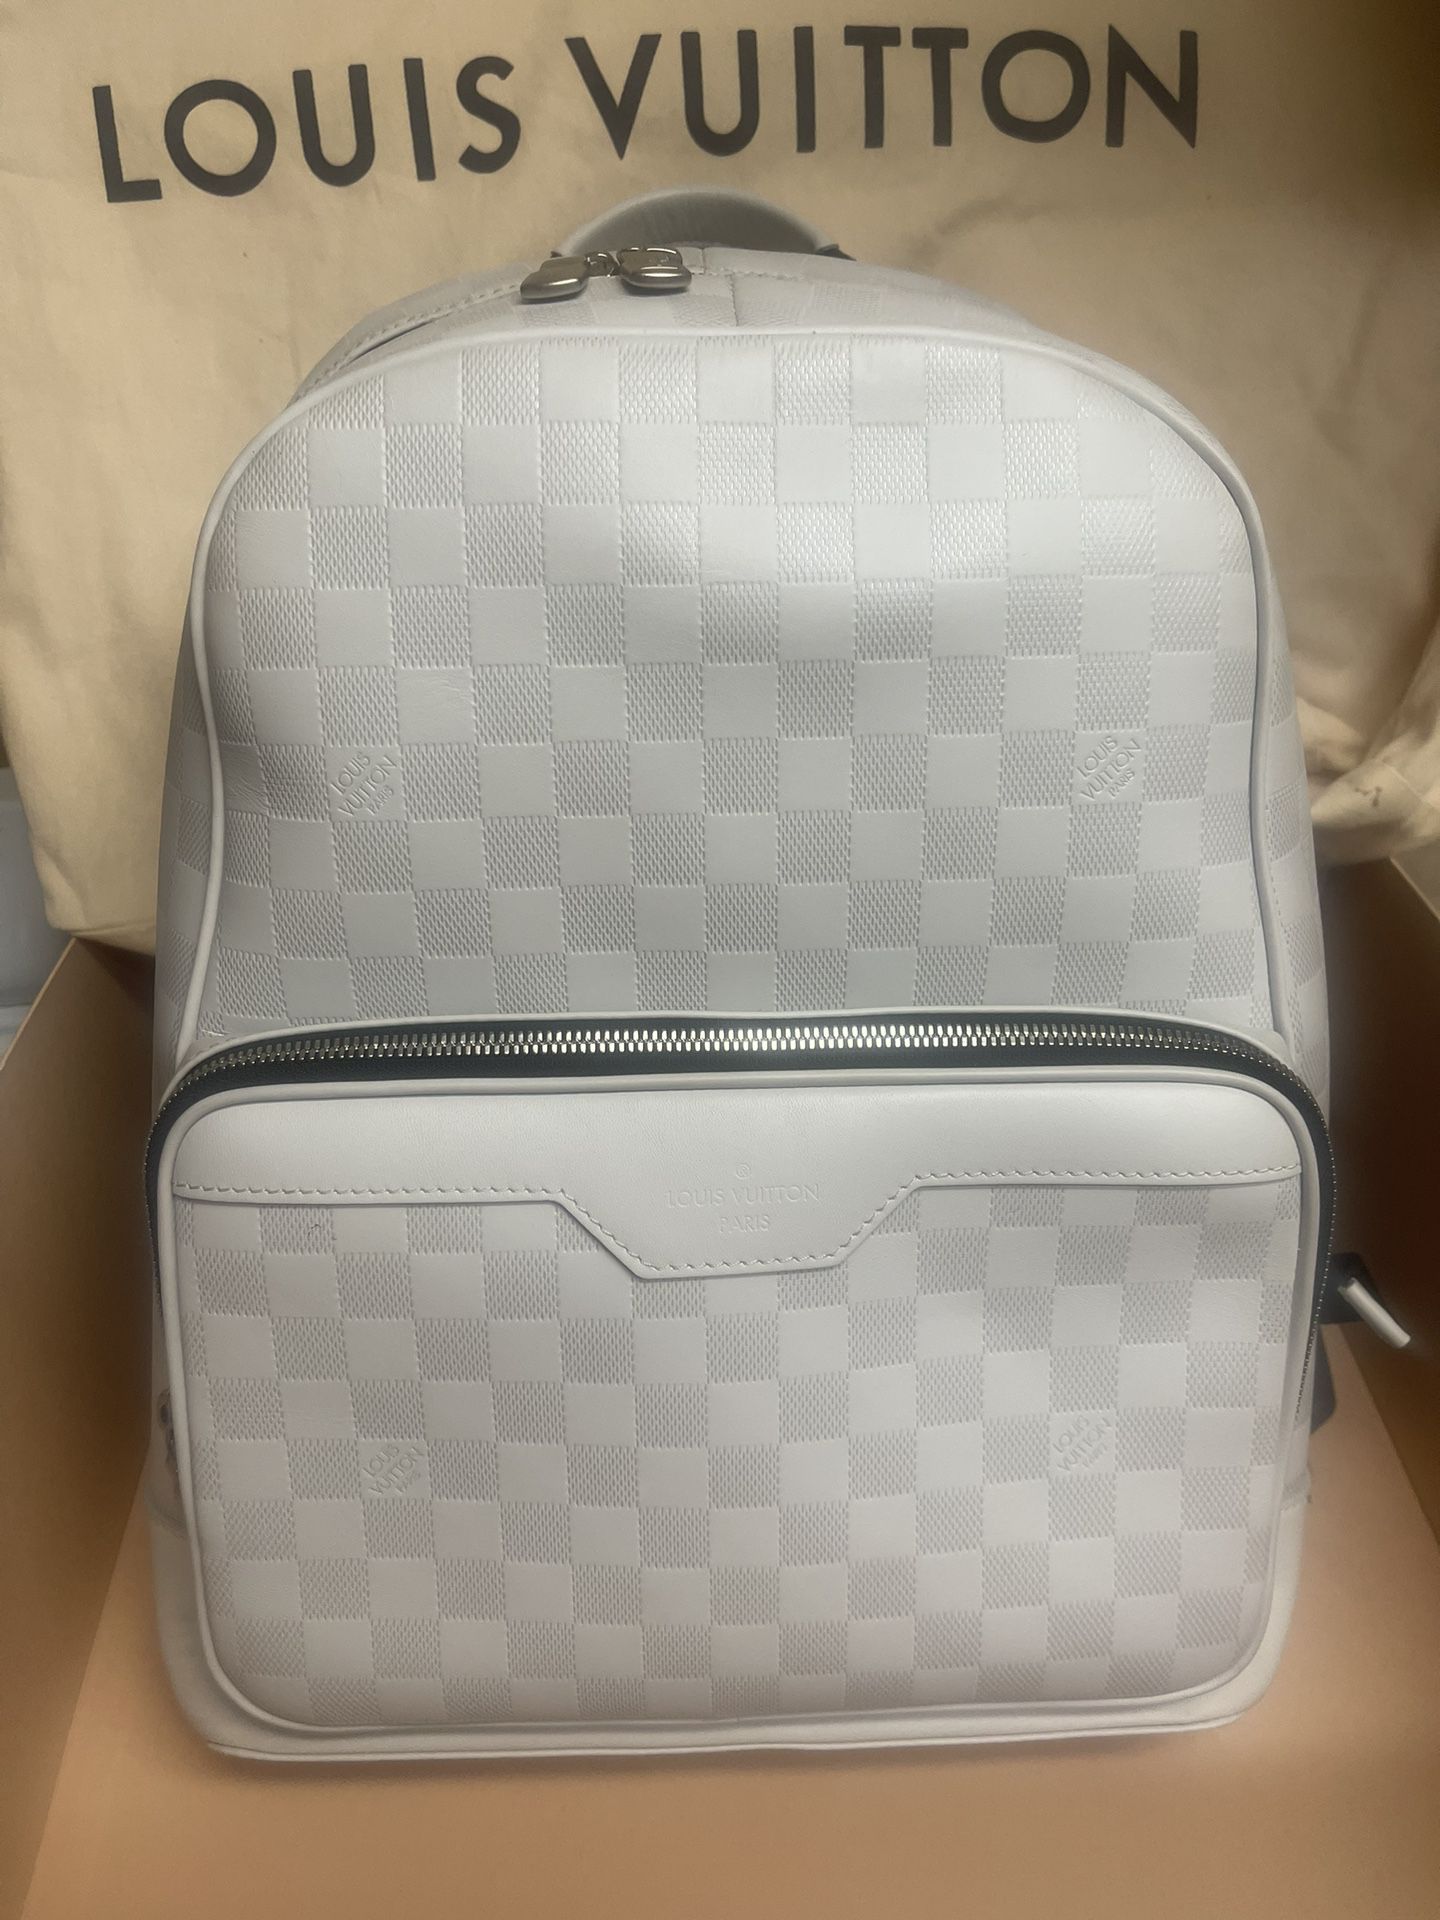 Rare White Louis Vuitton Discovery Backpack